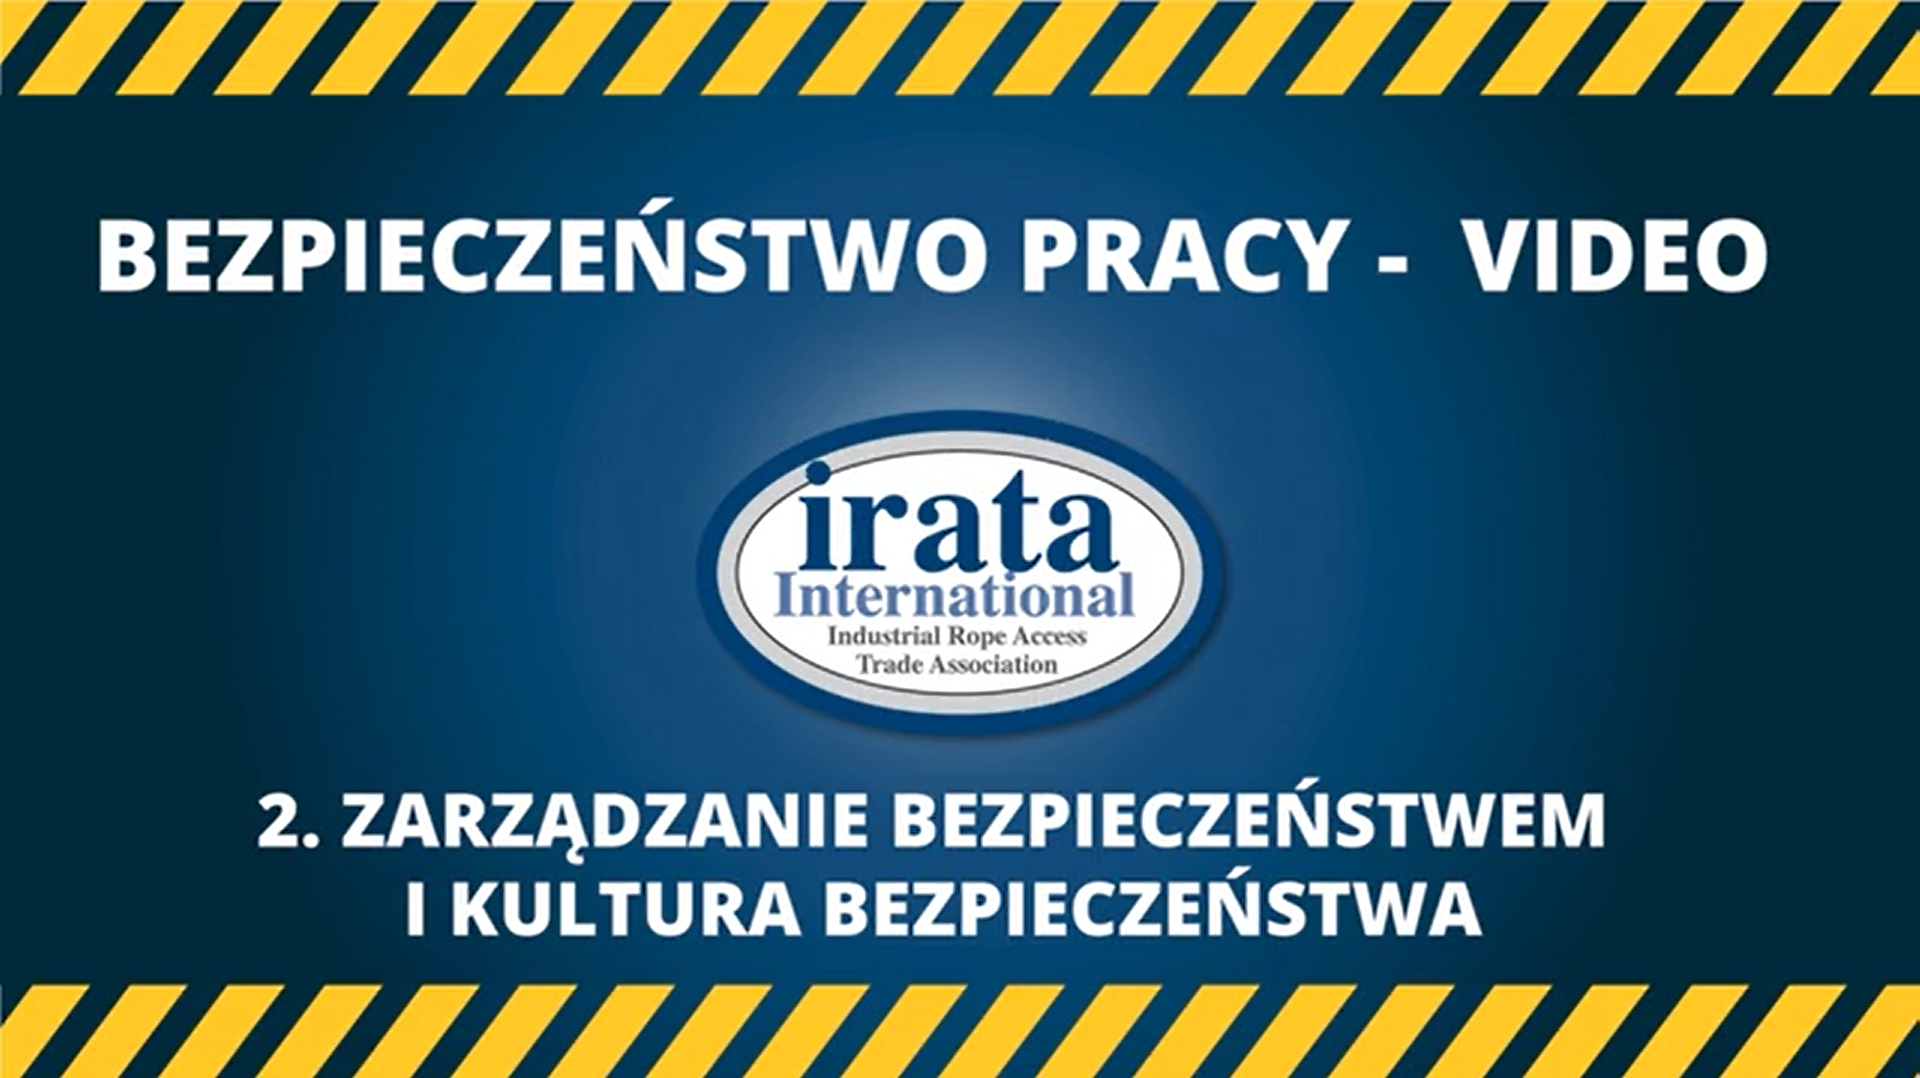 SAFETY AWARENESS VIDEO - management and safety culture - Polish SUBTITLES